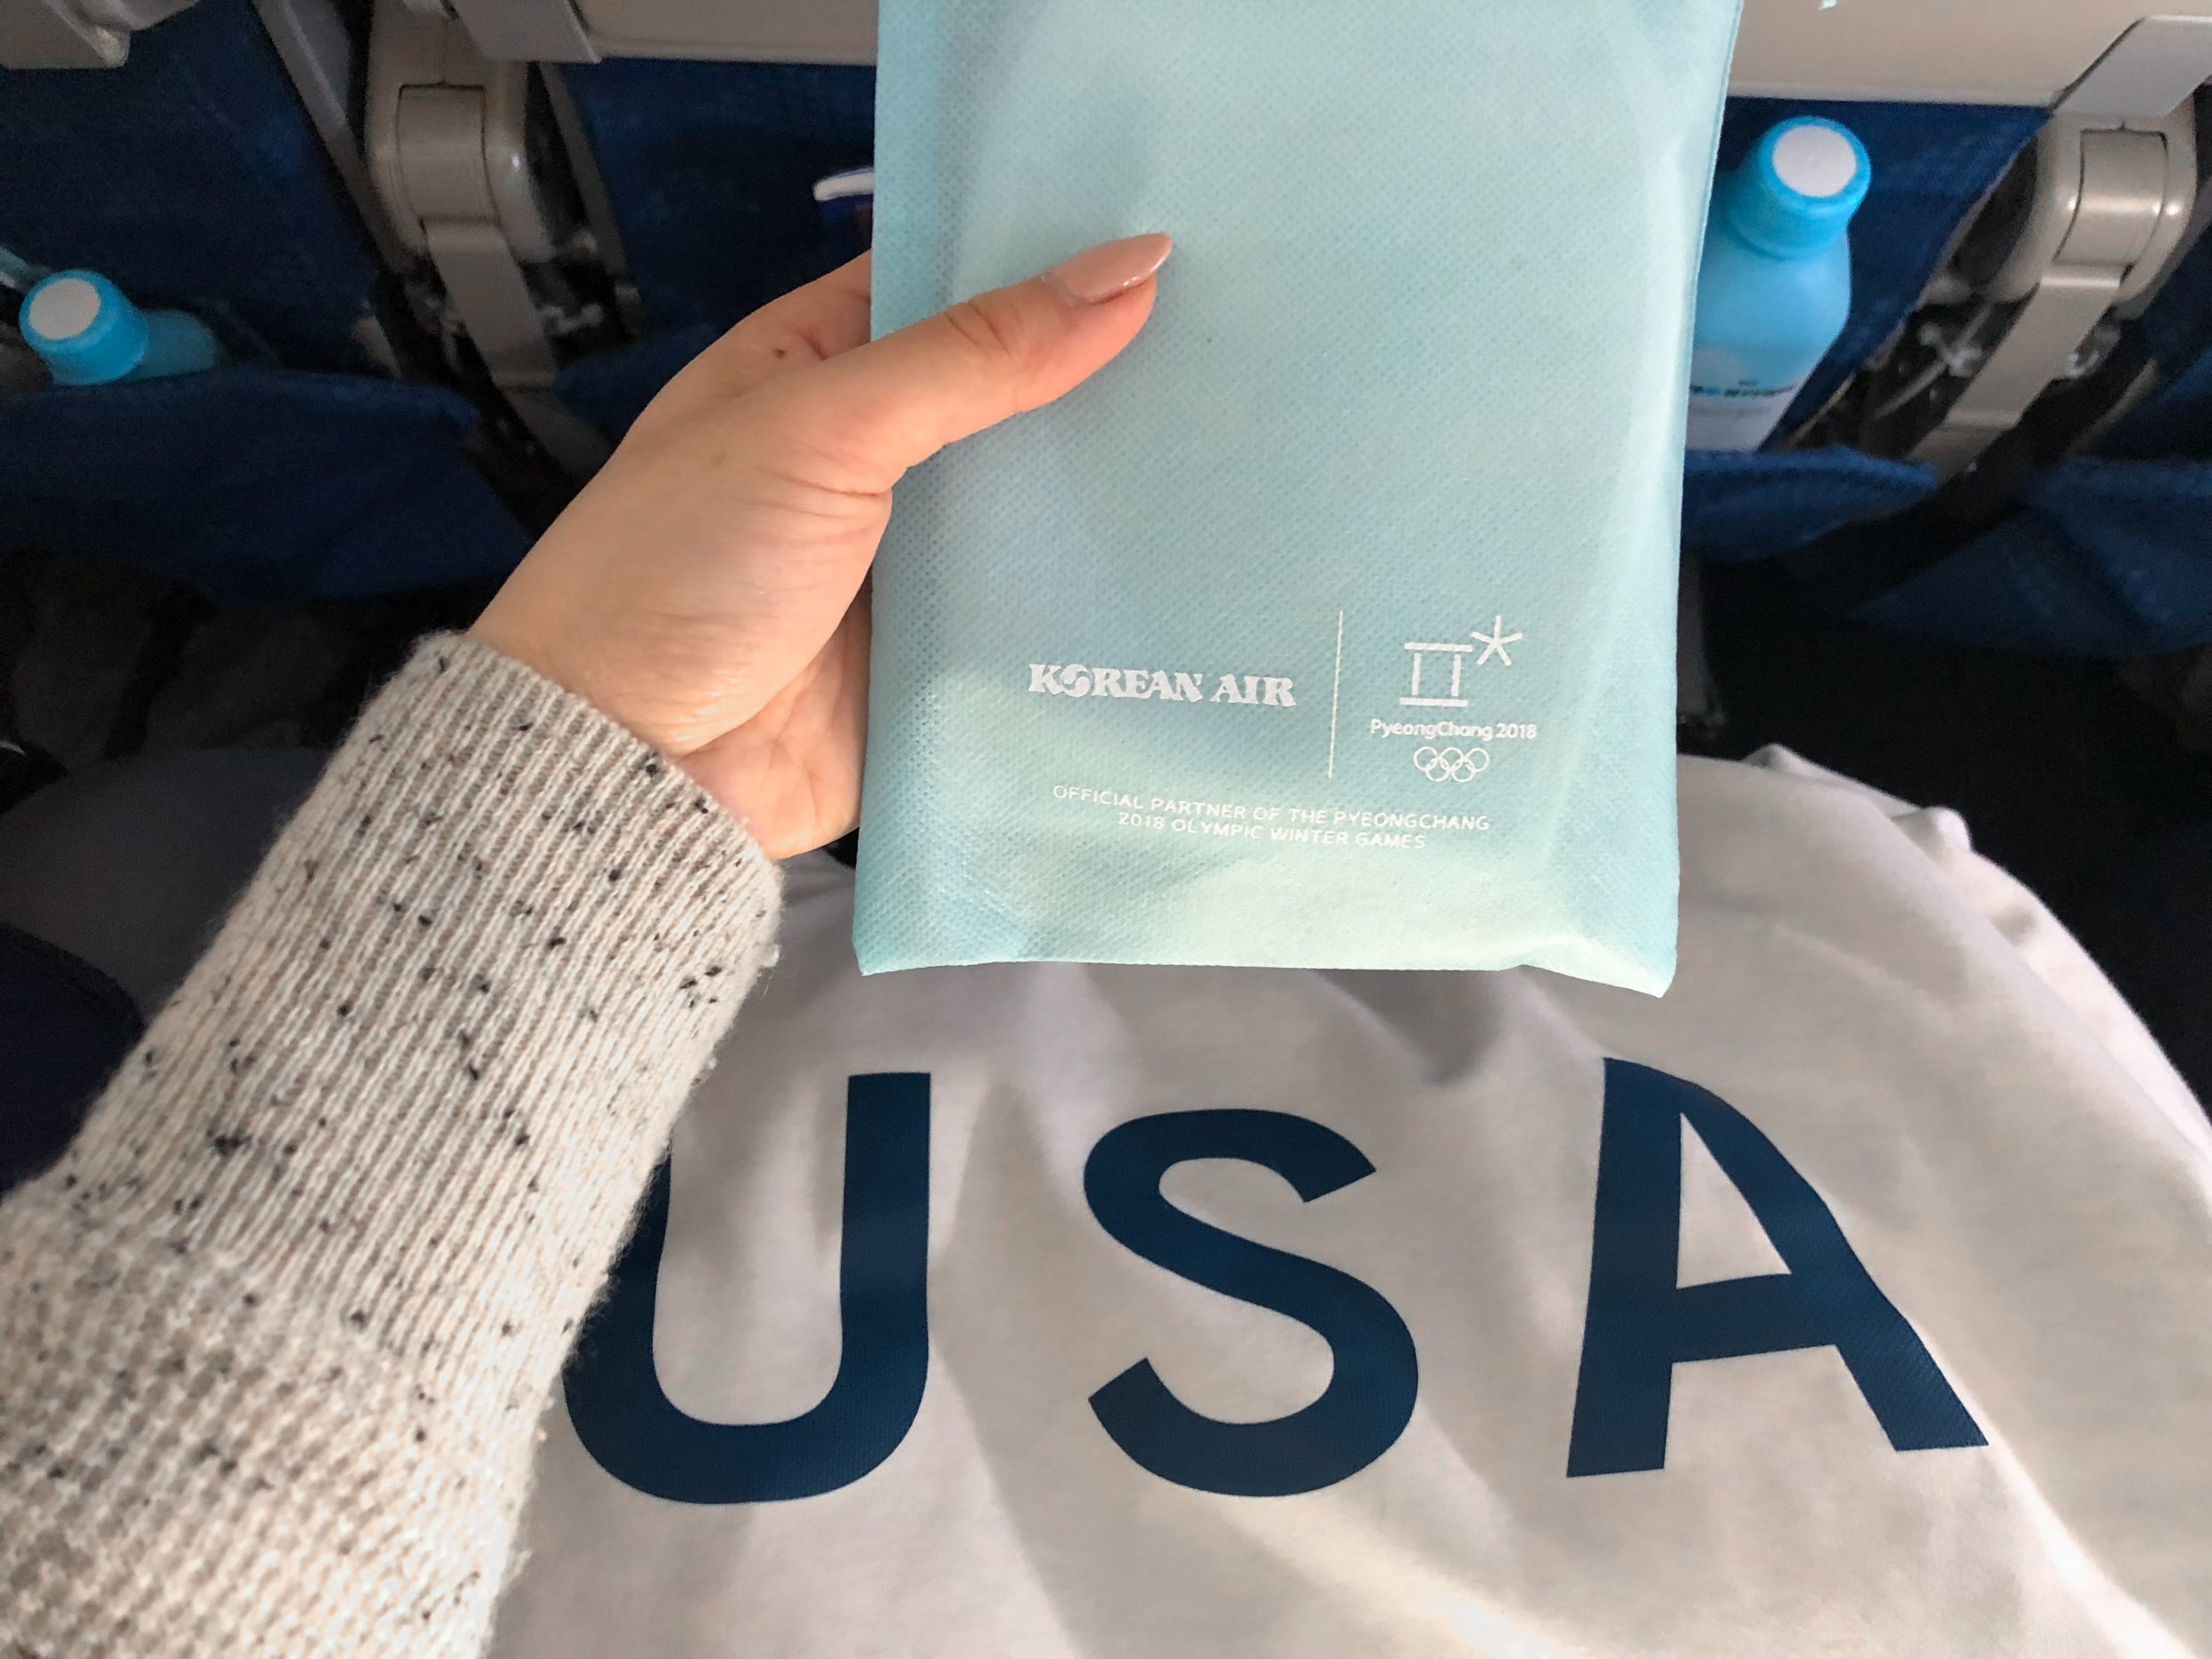 Blogger Hoang-Kim Cung coming home from the 2018 Olympics on Korean Air